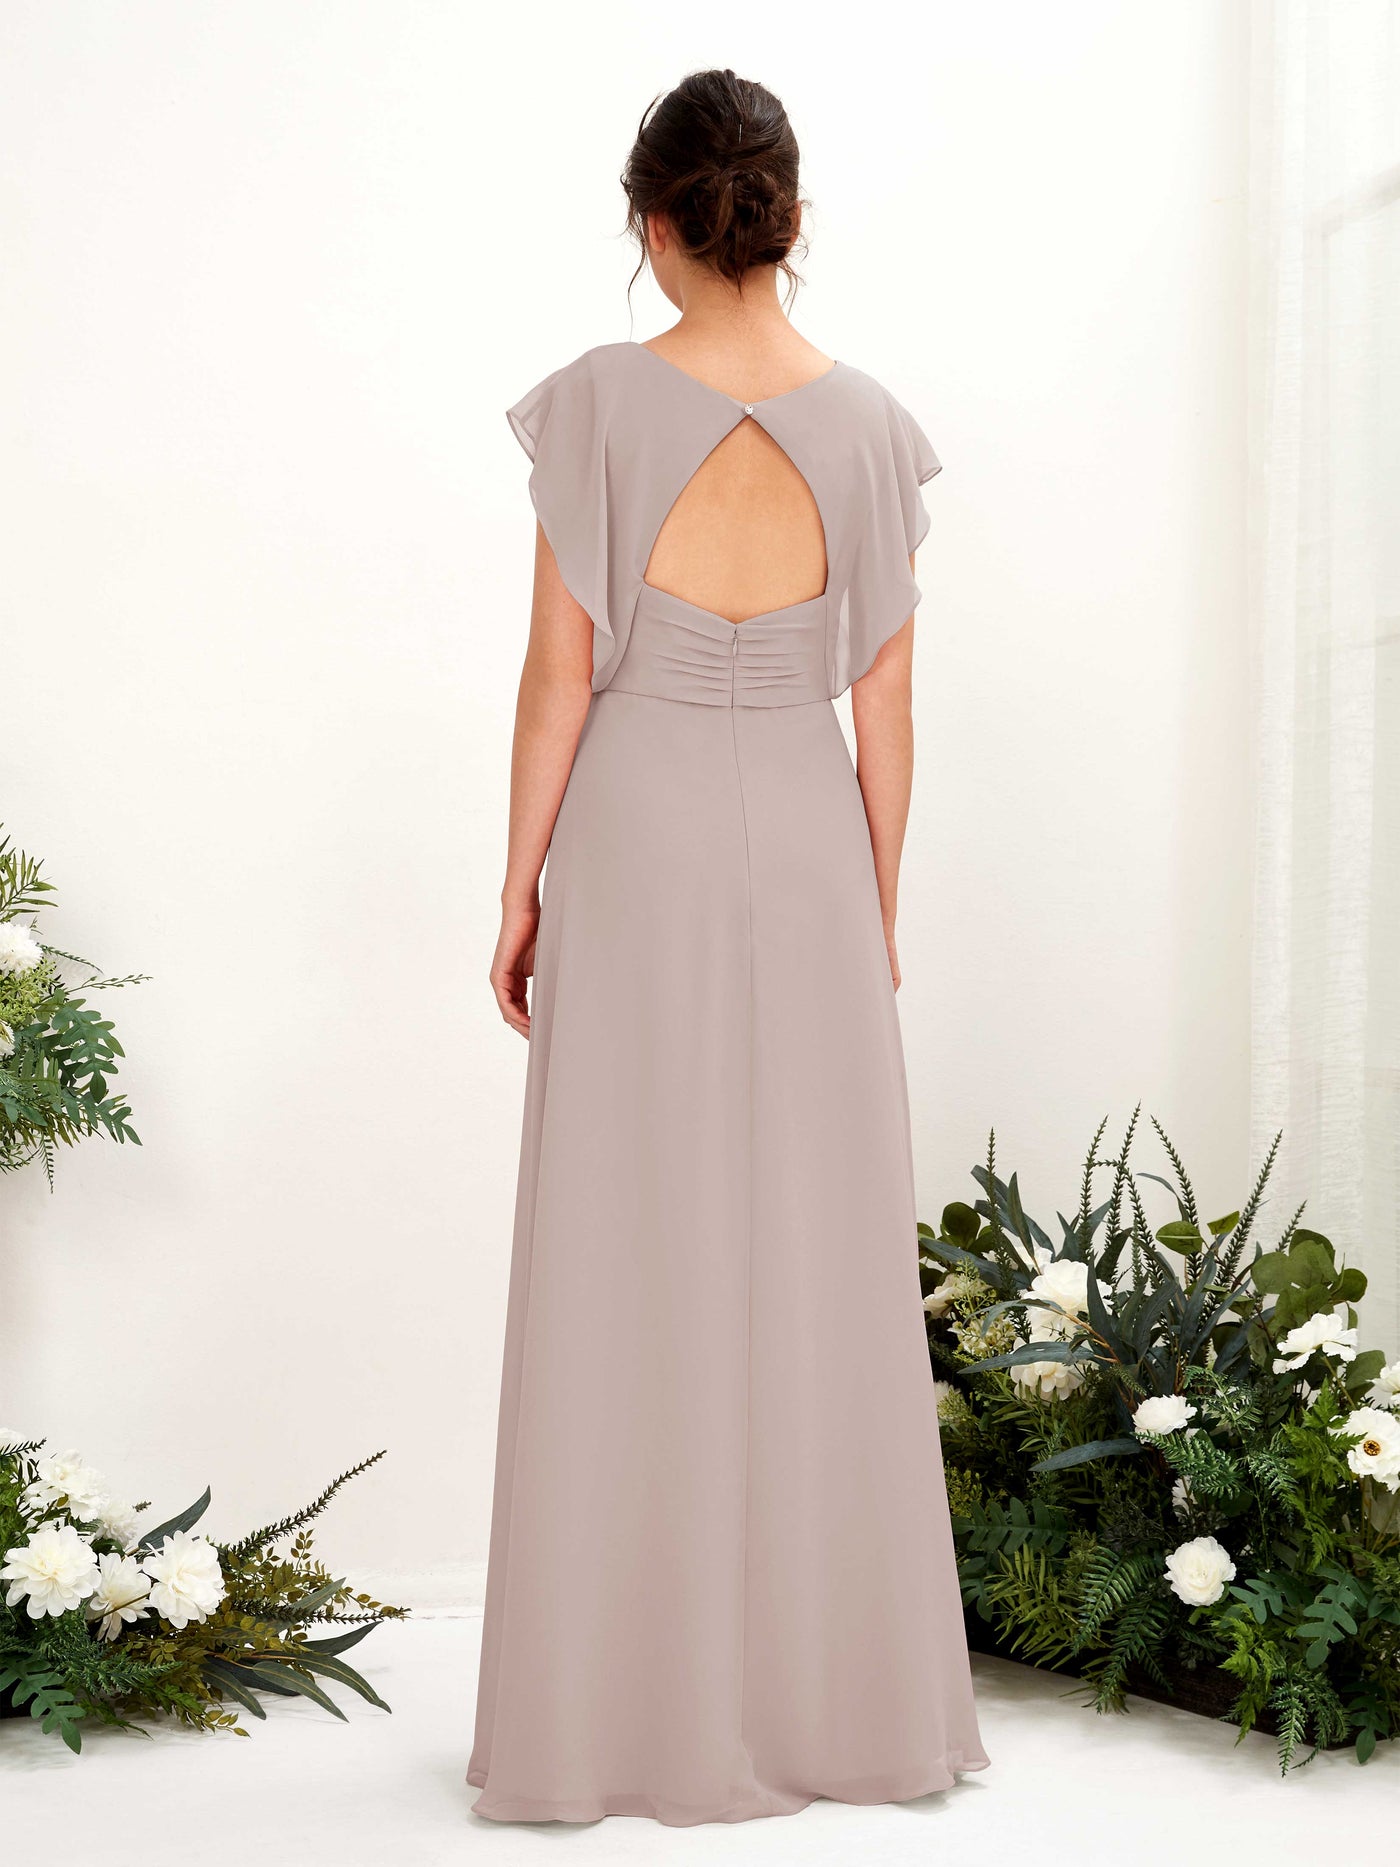 Taupe Bridesmaid Dresses Bridesmaid Dress A-line Chiffon V-neck Full Length Short Sleeves Wedding Party Dress (81225624)#color_taupe